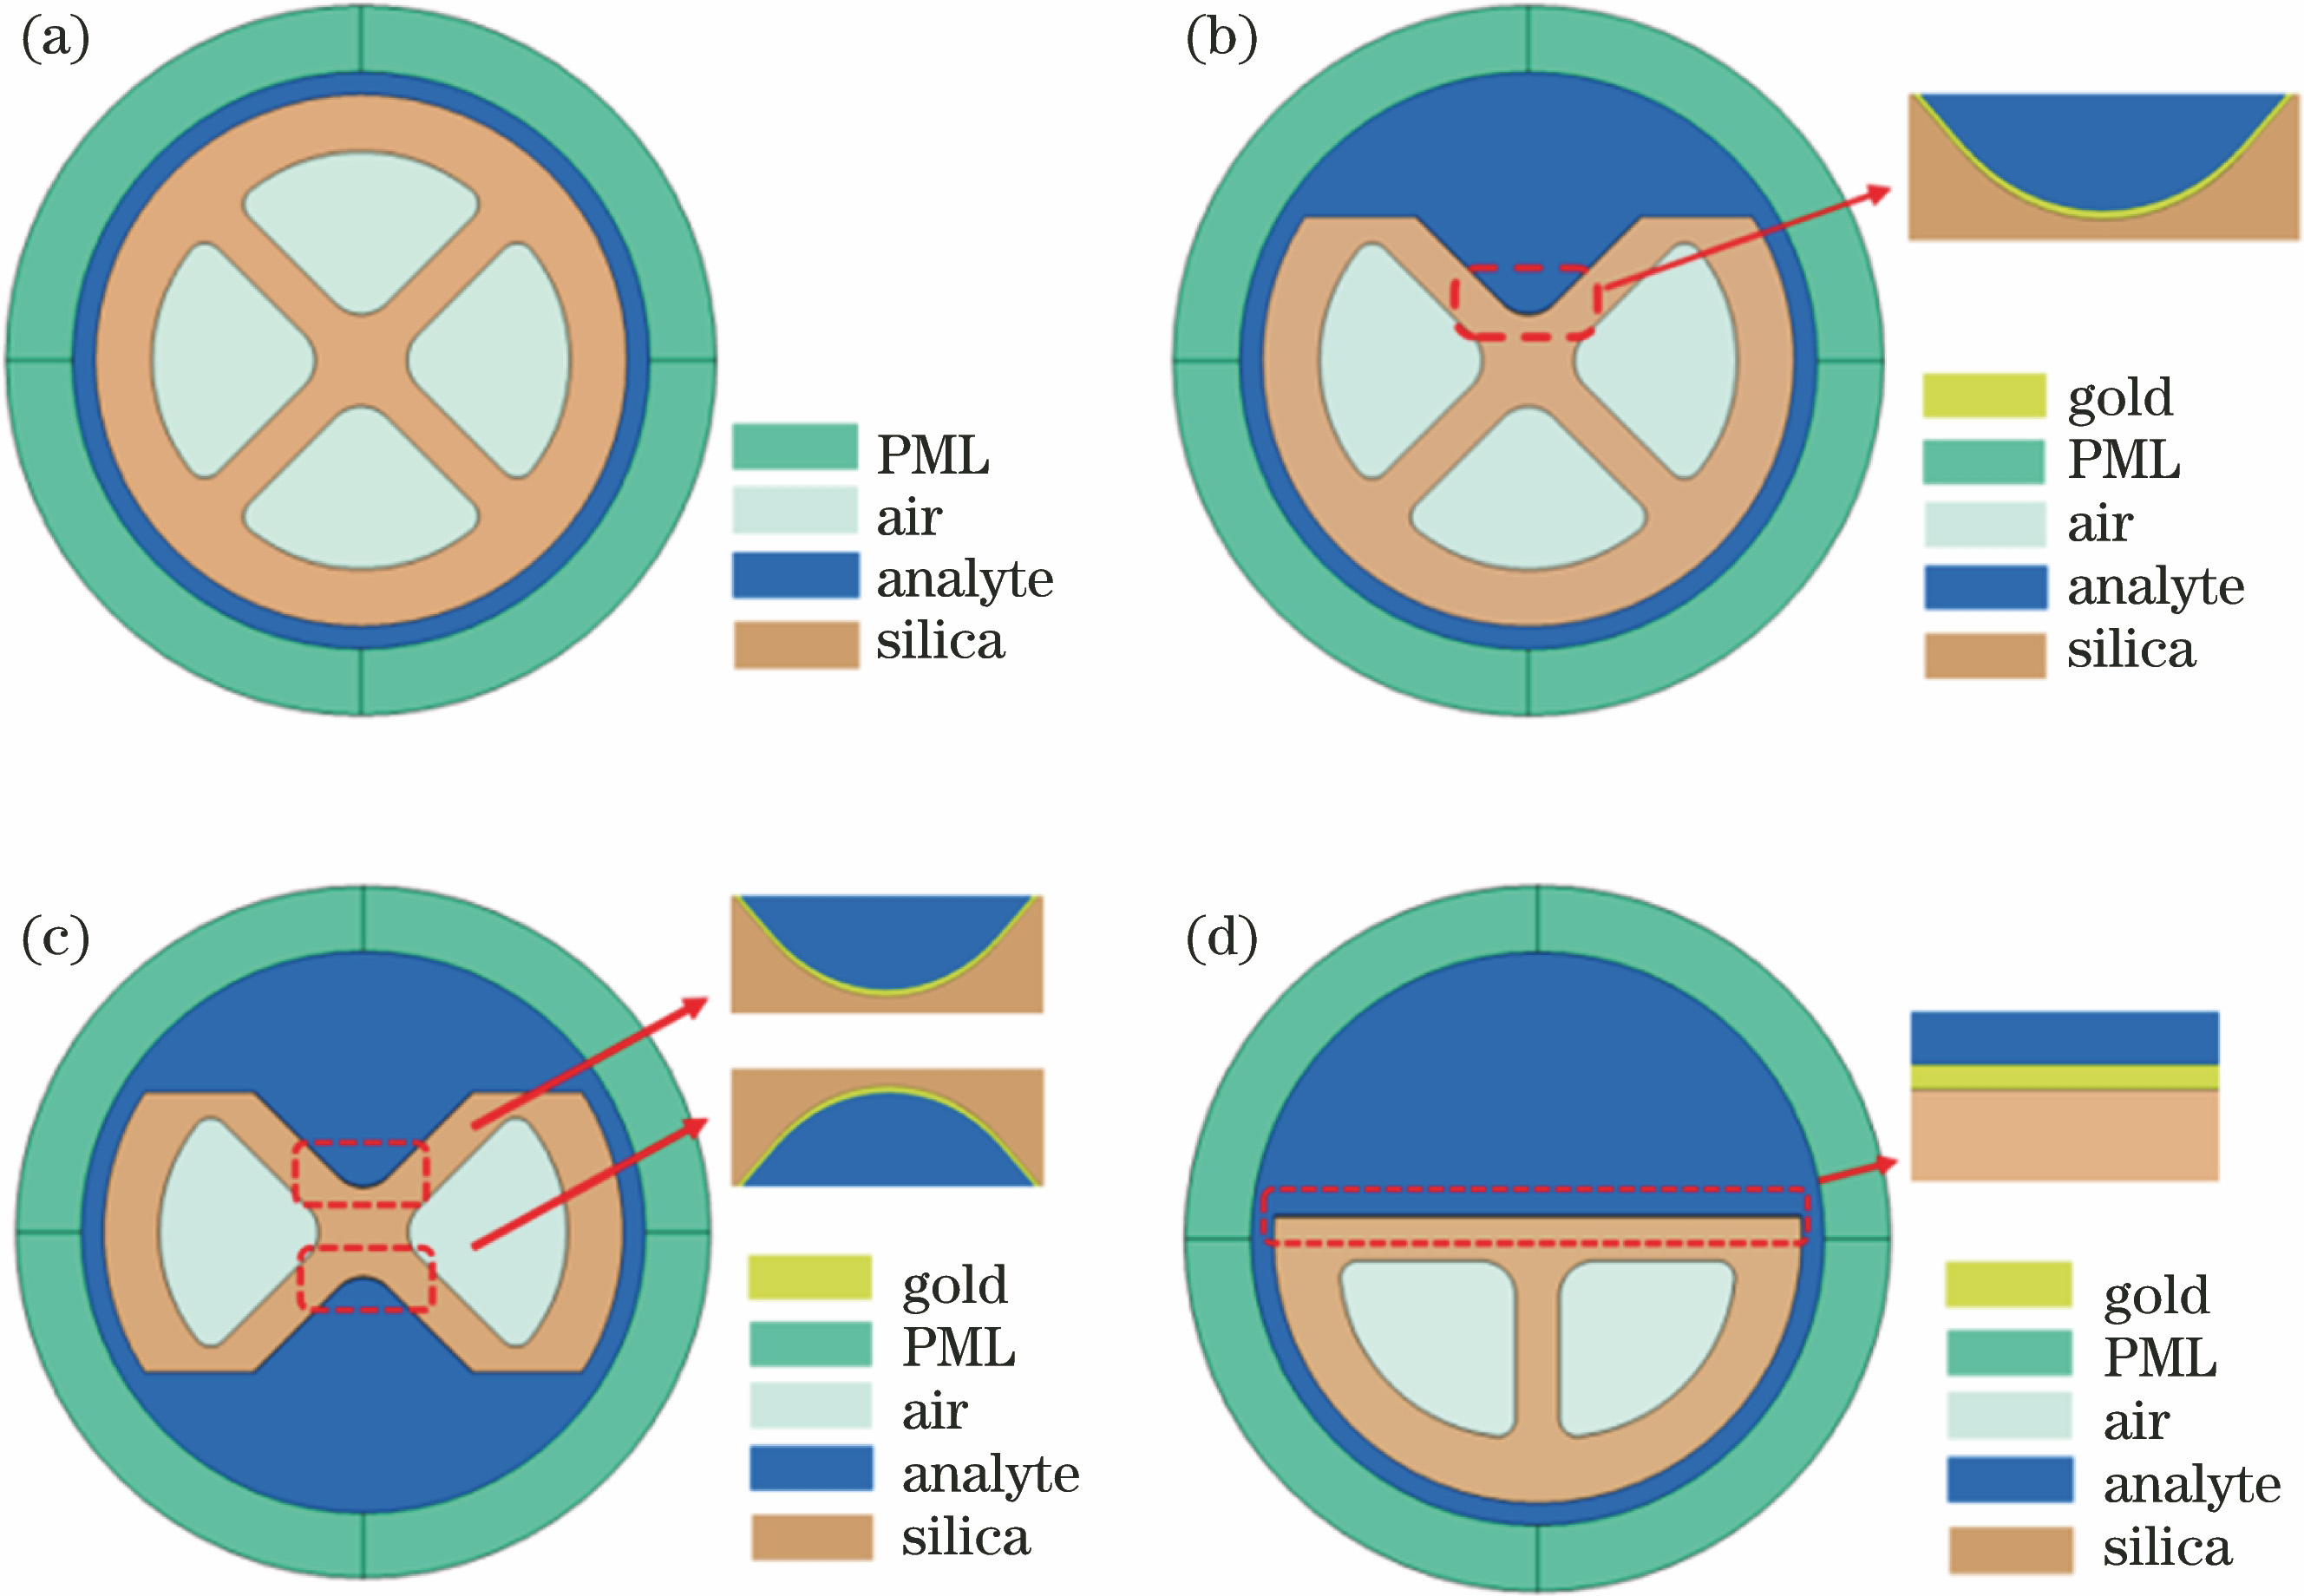 Schematic diagrams of structure and polishing cross-section of four-pole suspended core fiber. (a) Complete structure of fiber; (b) polishing cross section of one hole; (c) polishing cross section of two opposite holes; (d) polishing cross section of two adjacent holes